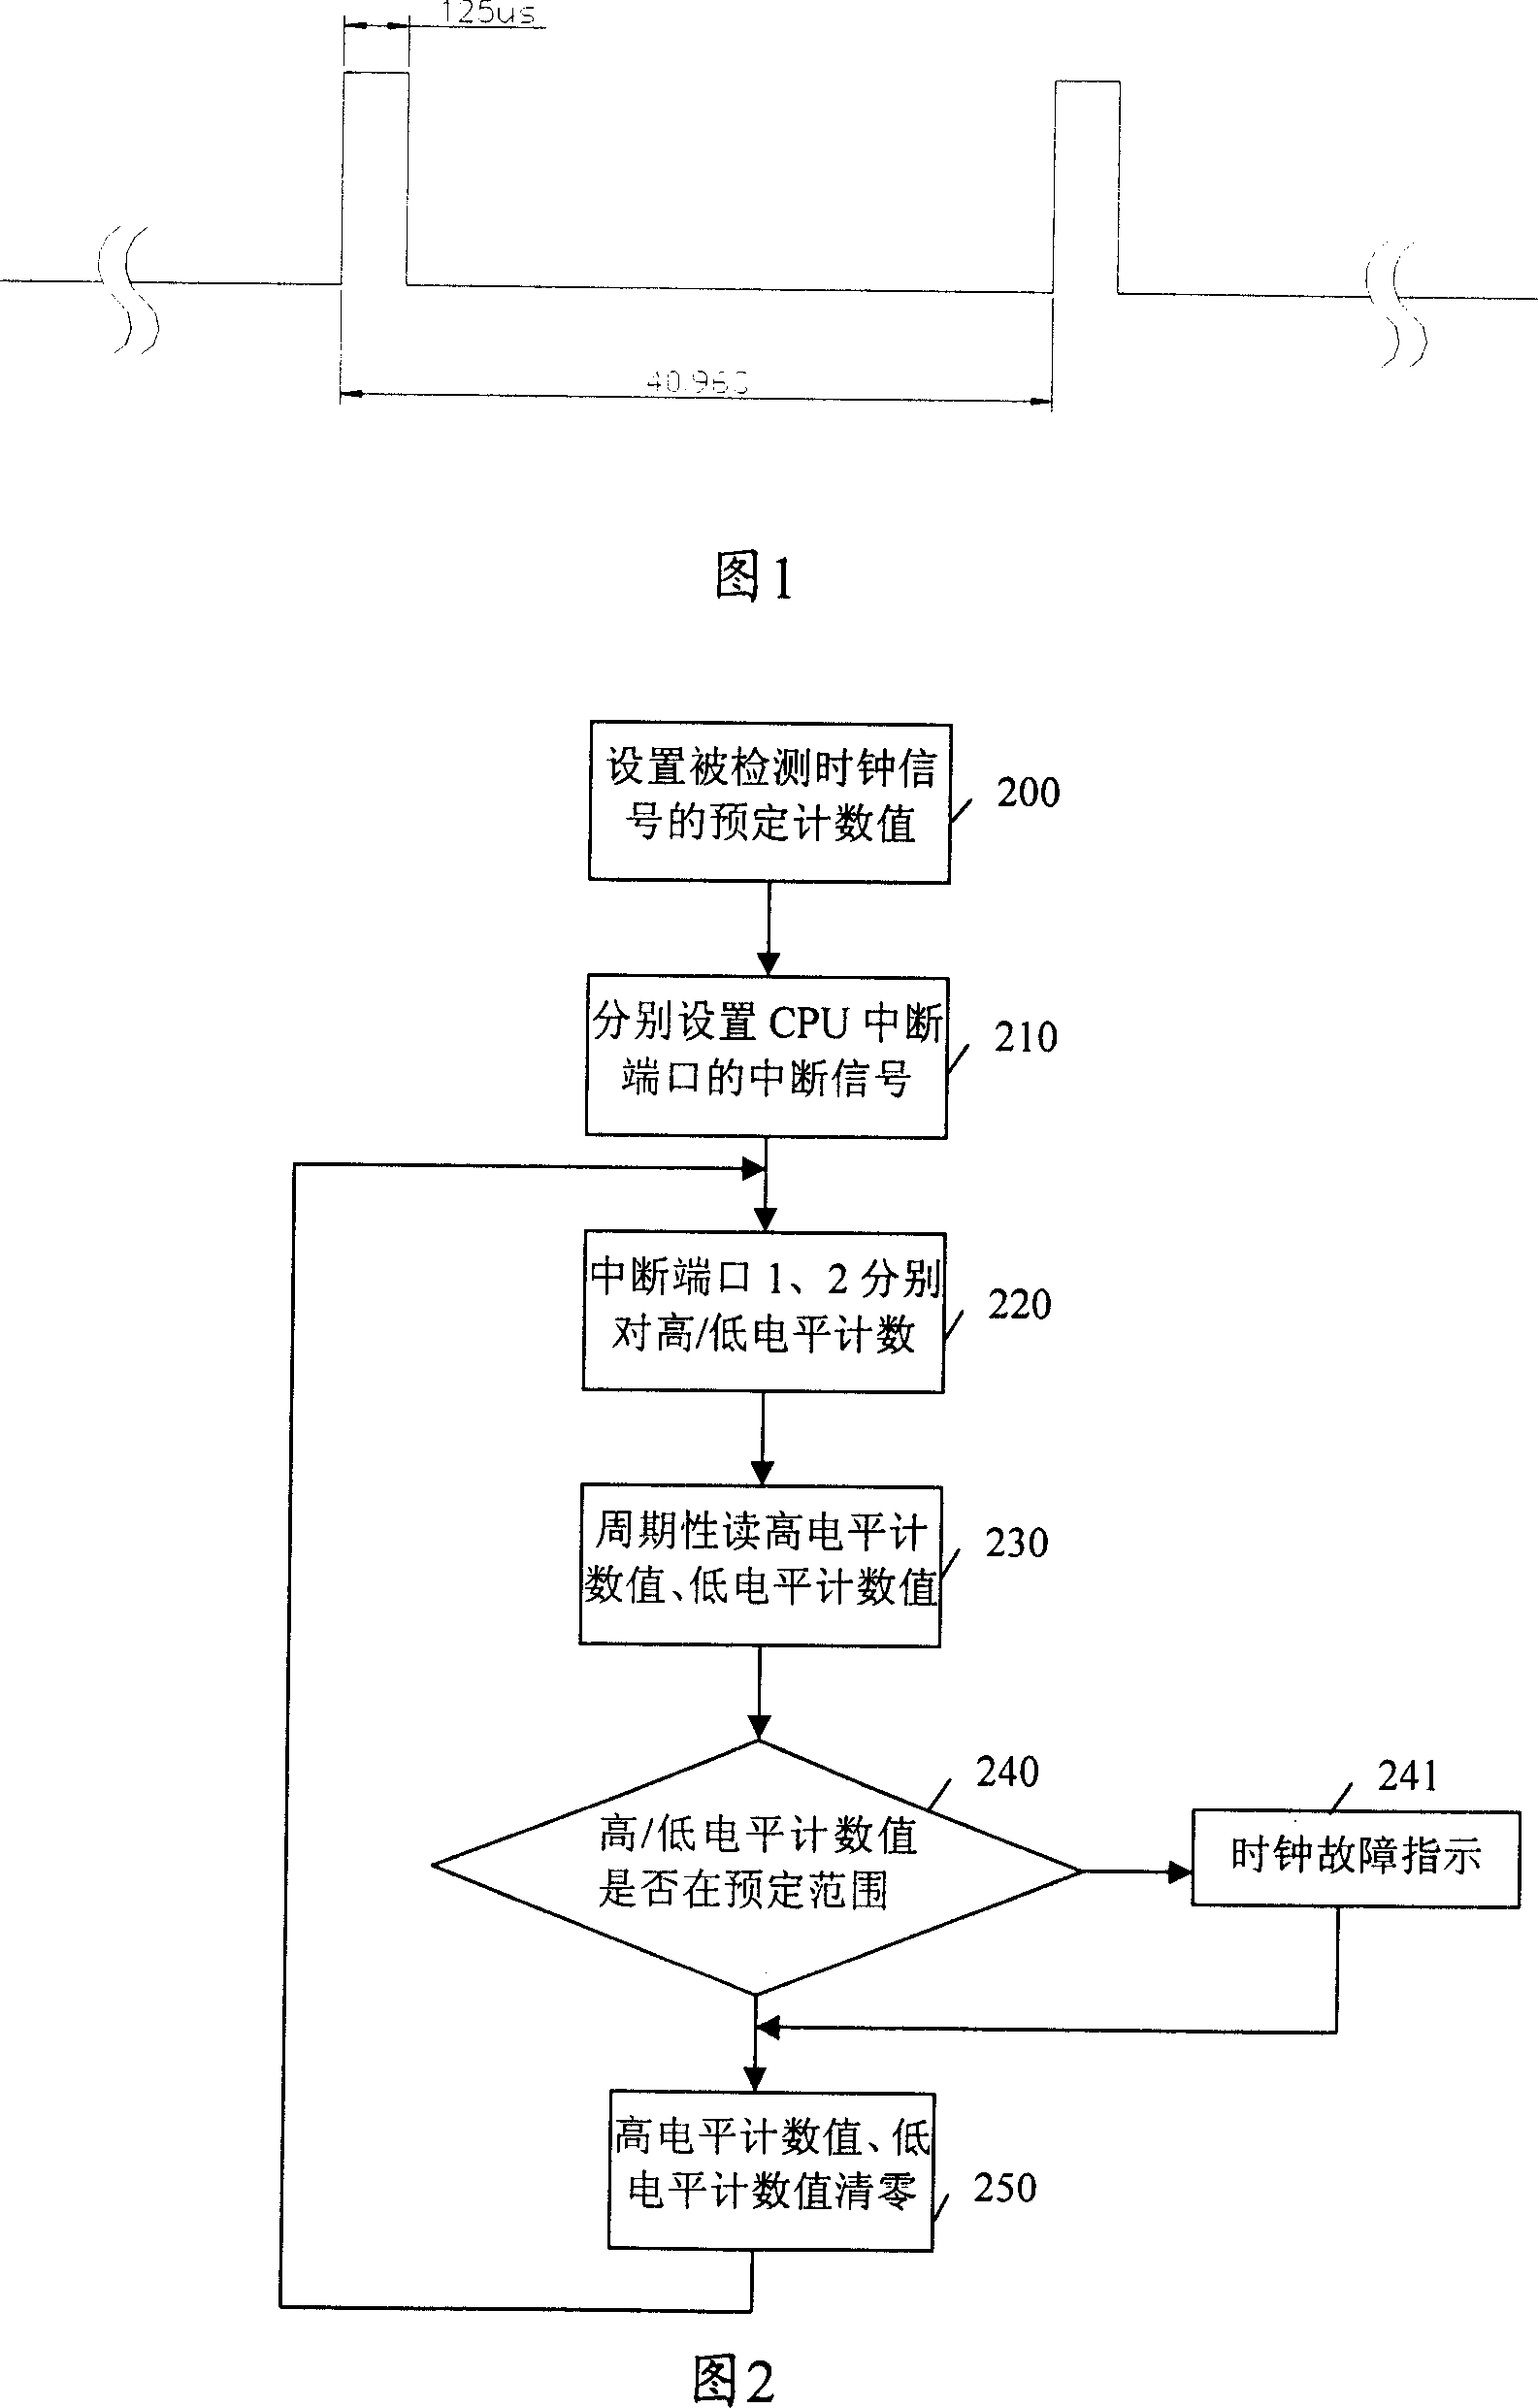 Clock signal detection method and apparatus in electronic devices